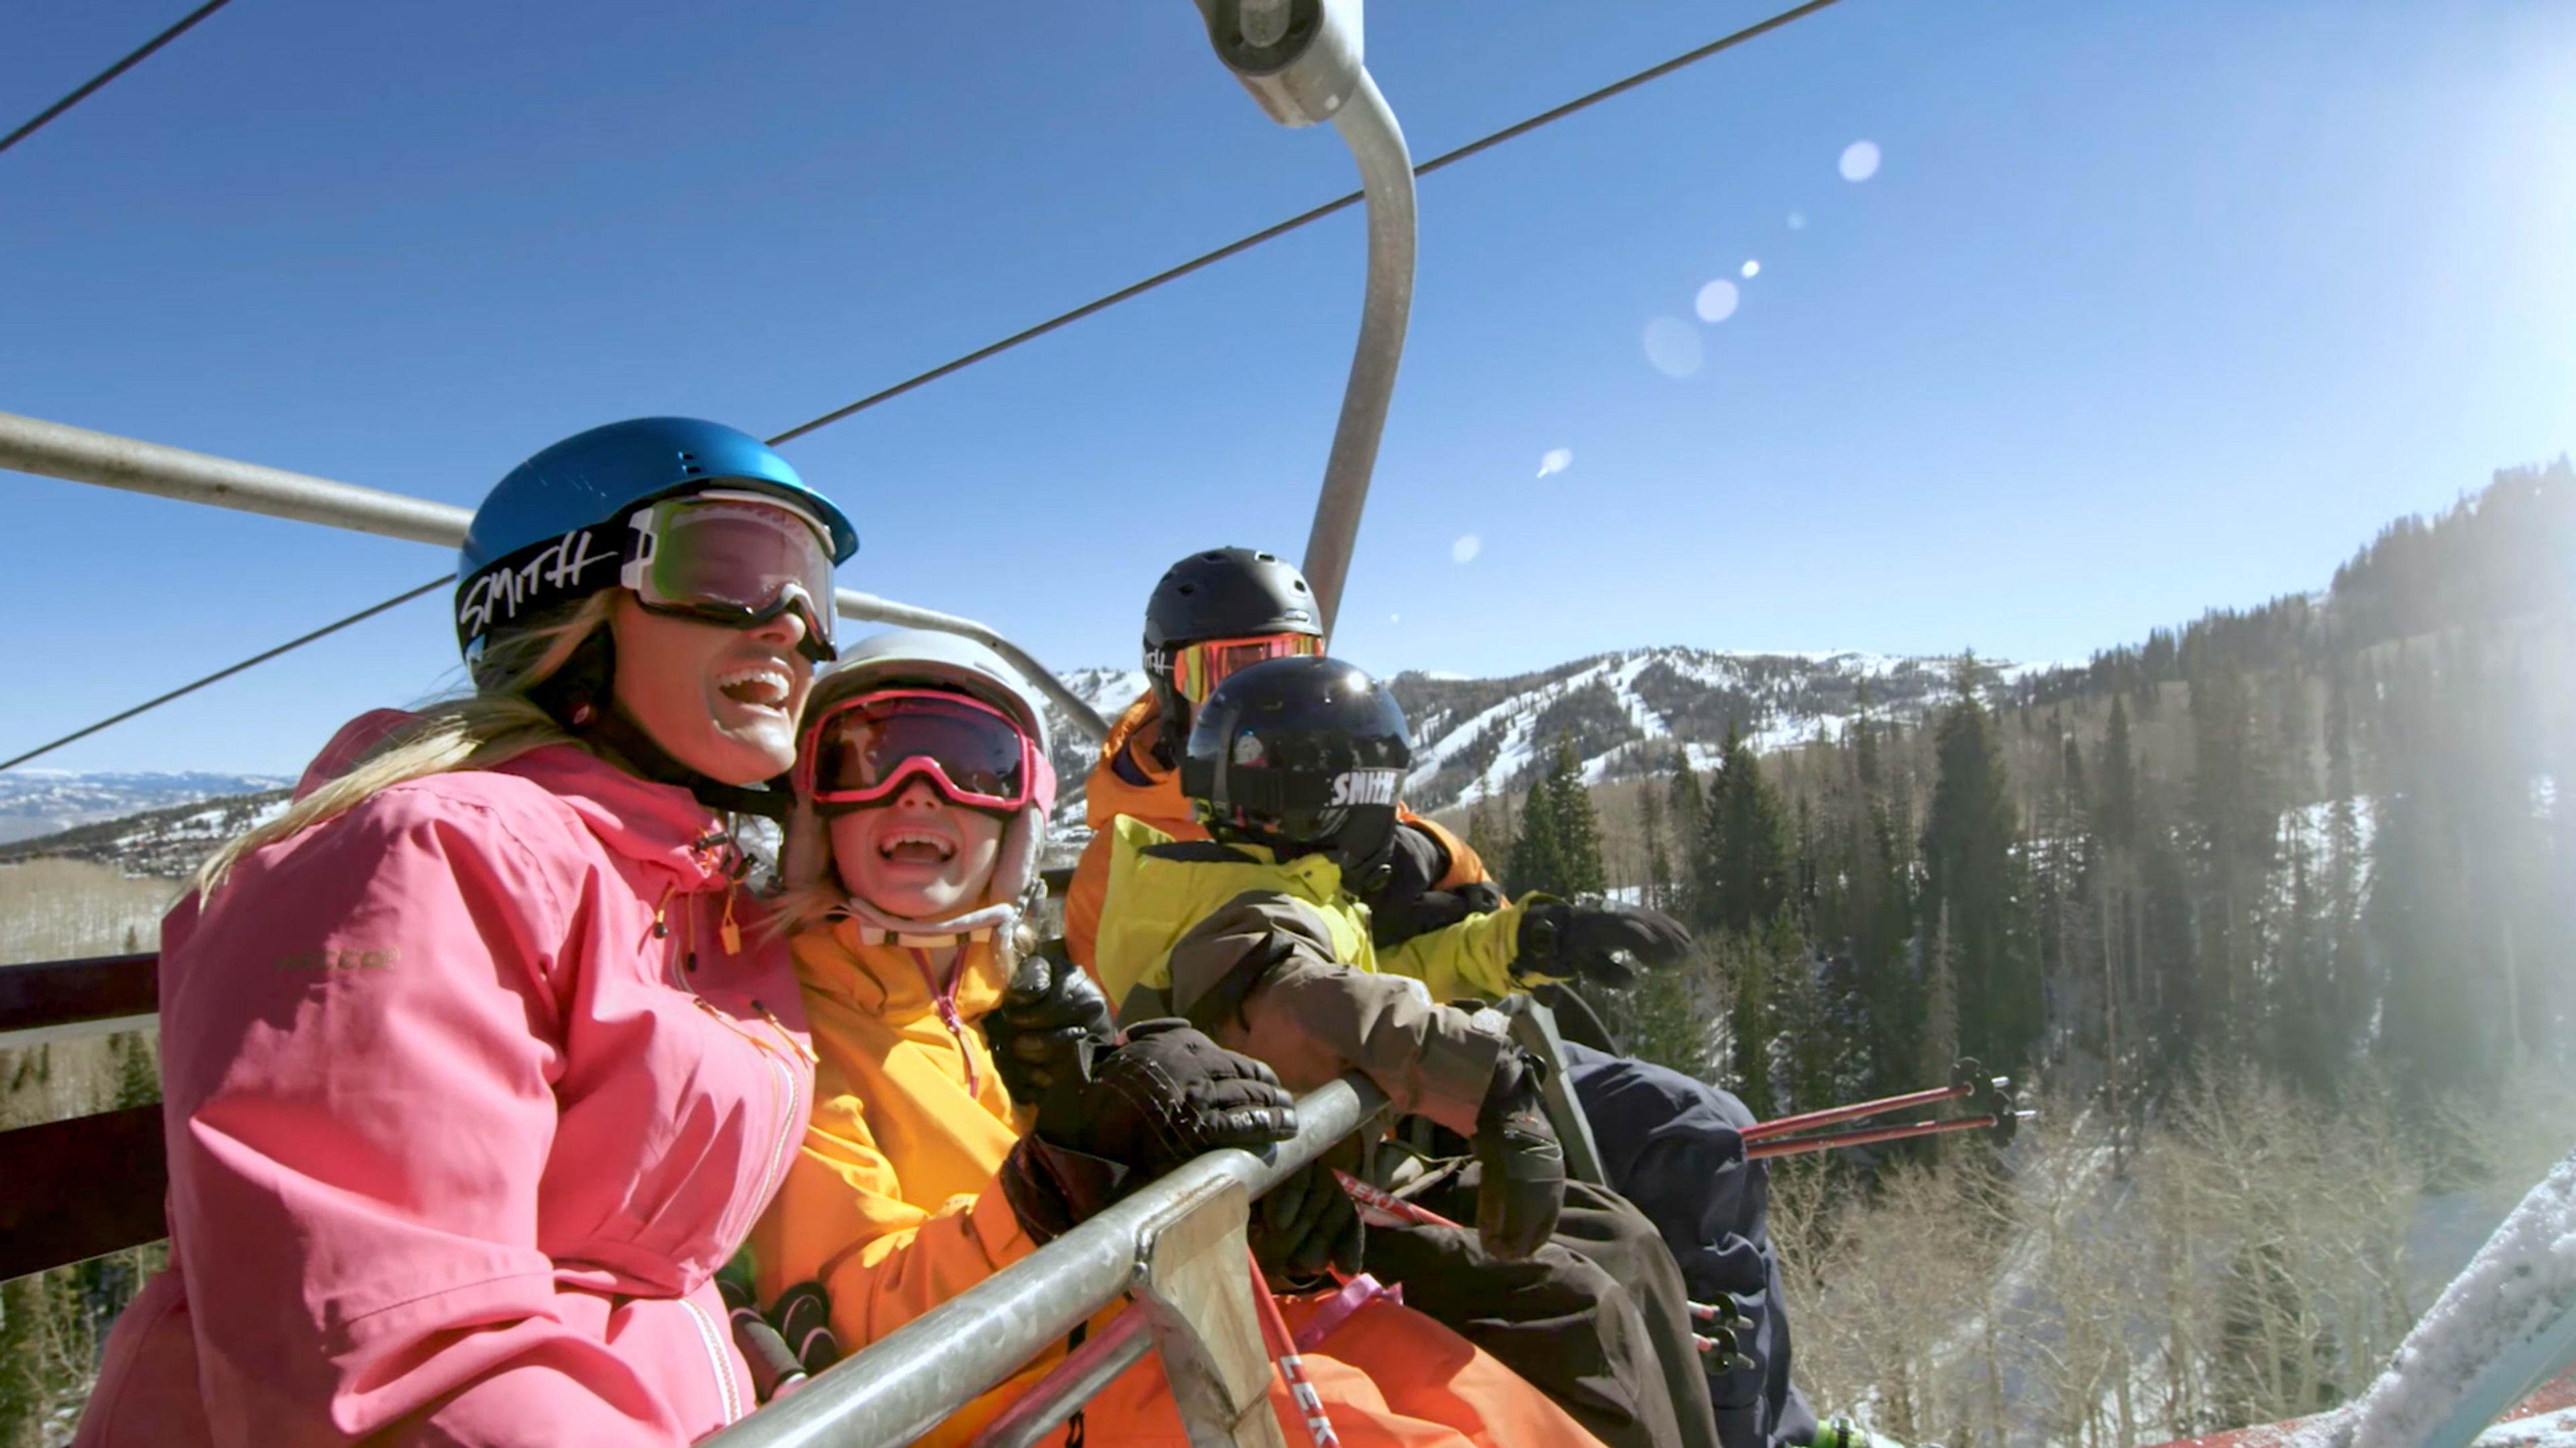 Siri for skiers? Vail’s new bot, Emma, helps you hit the slopes